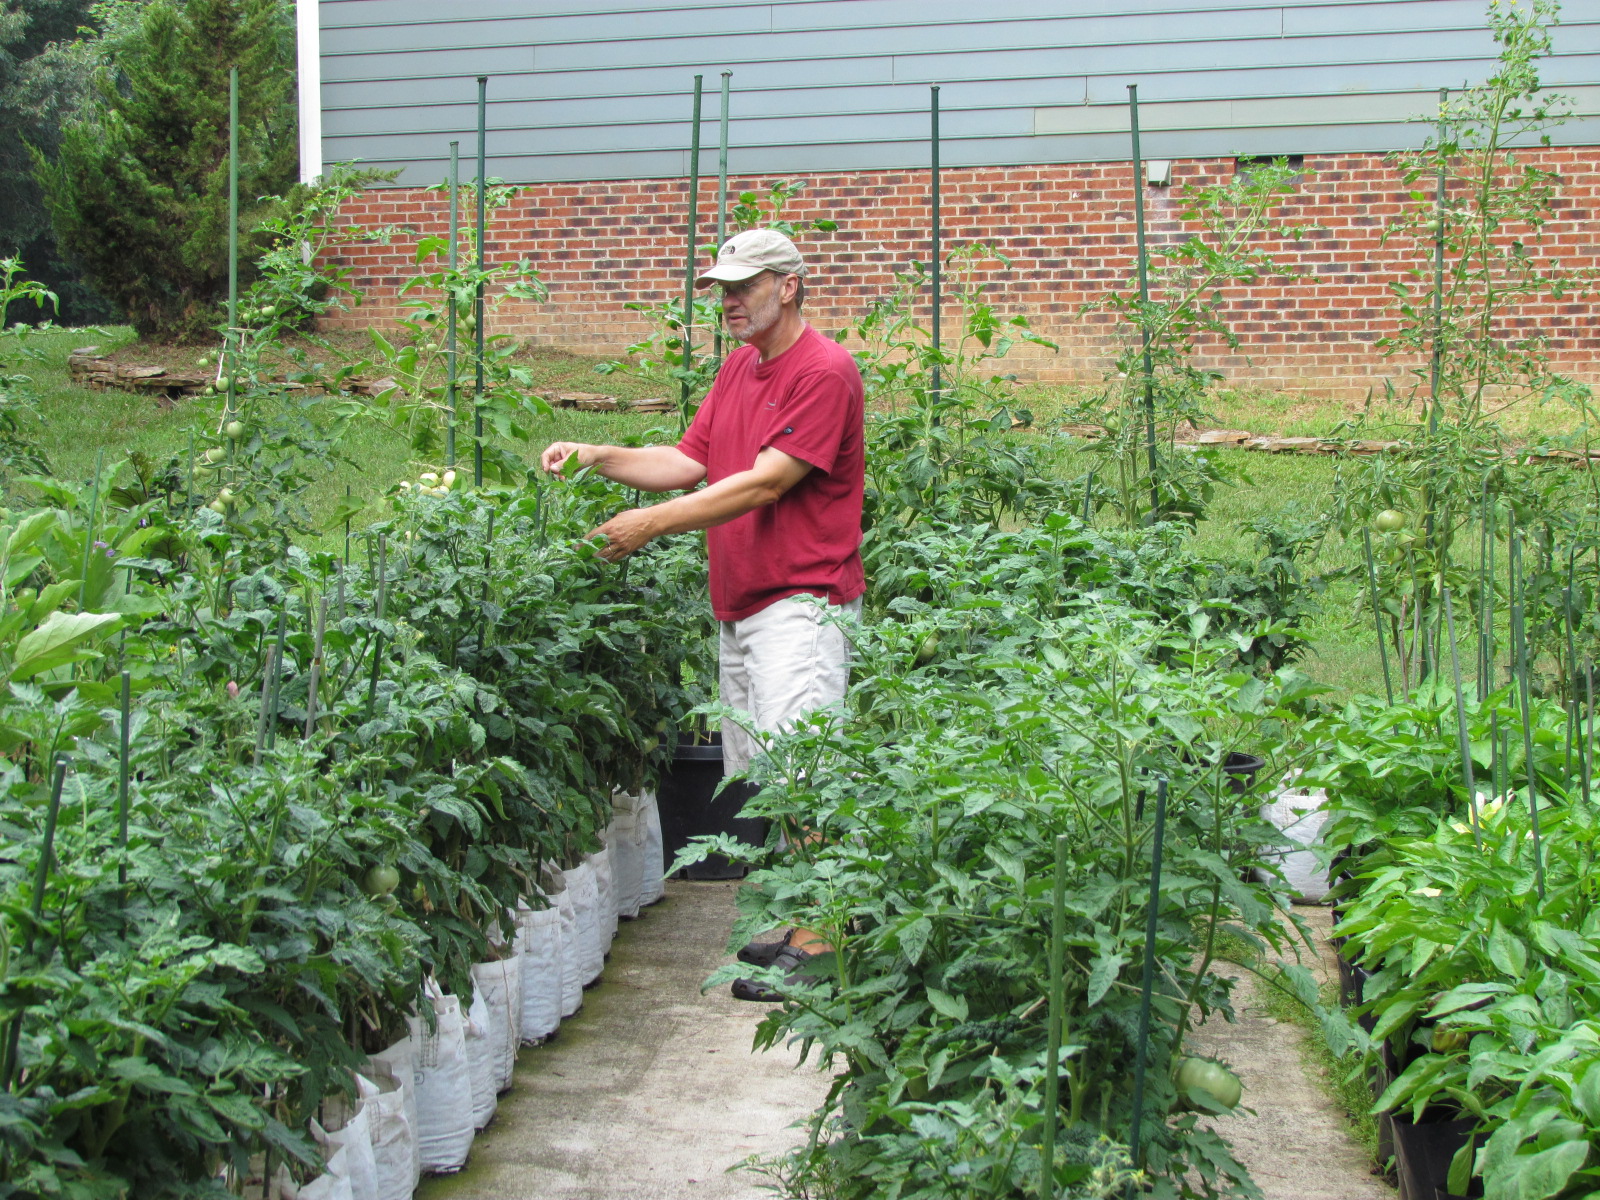 A man tending to rows of tomato plants in a yard